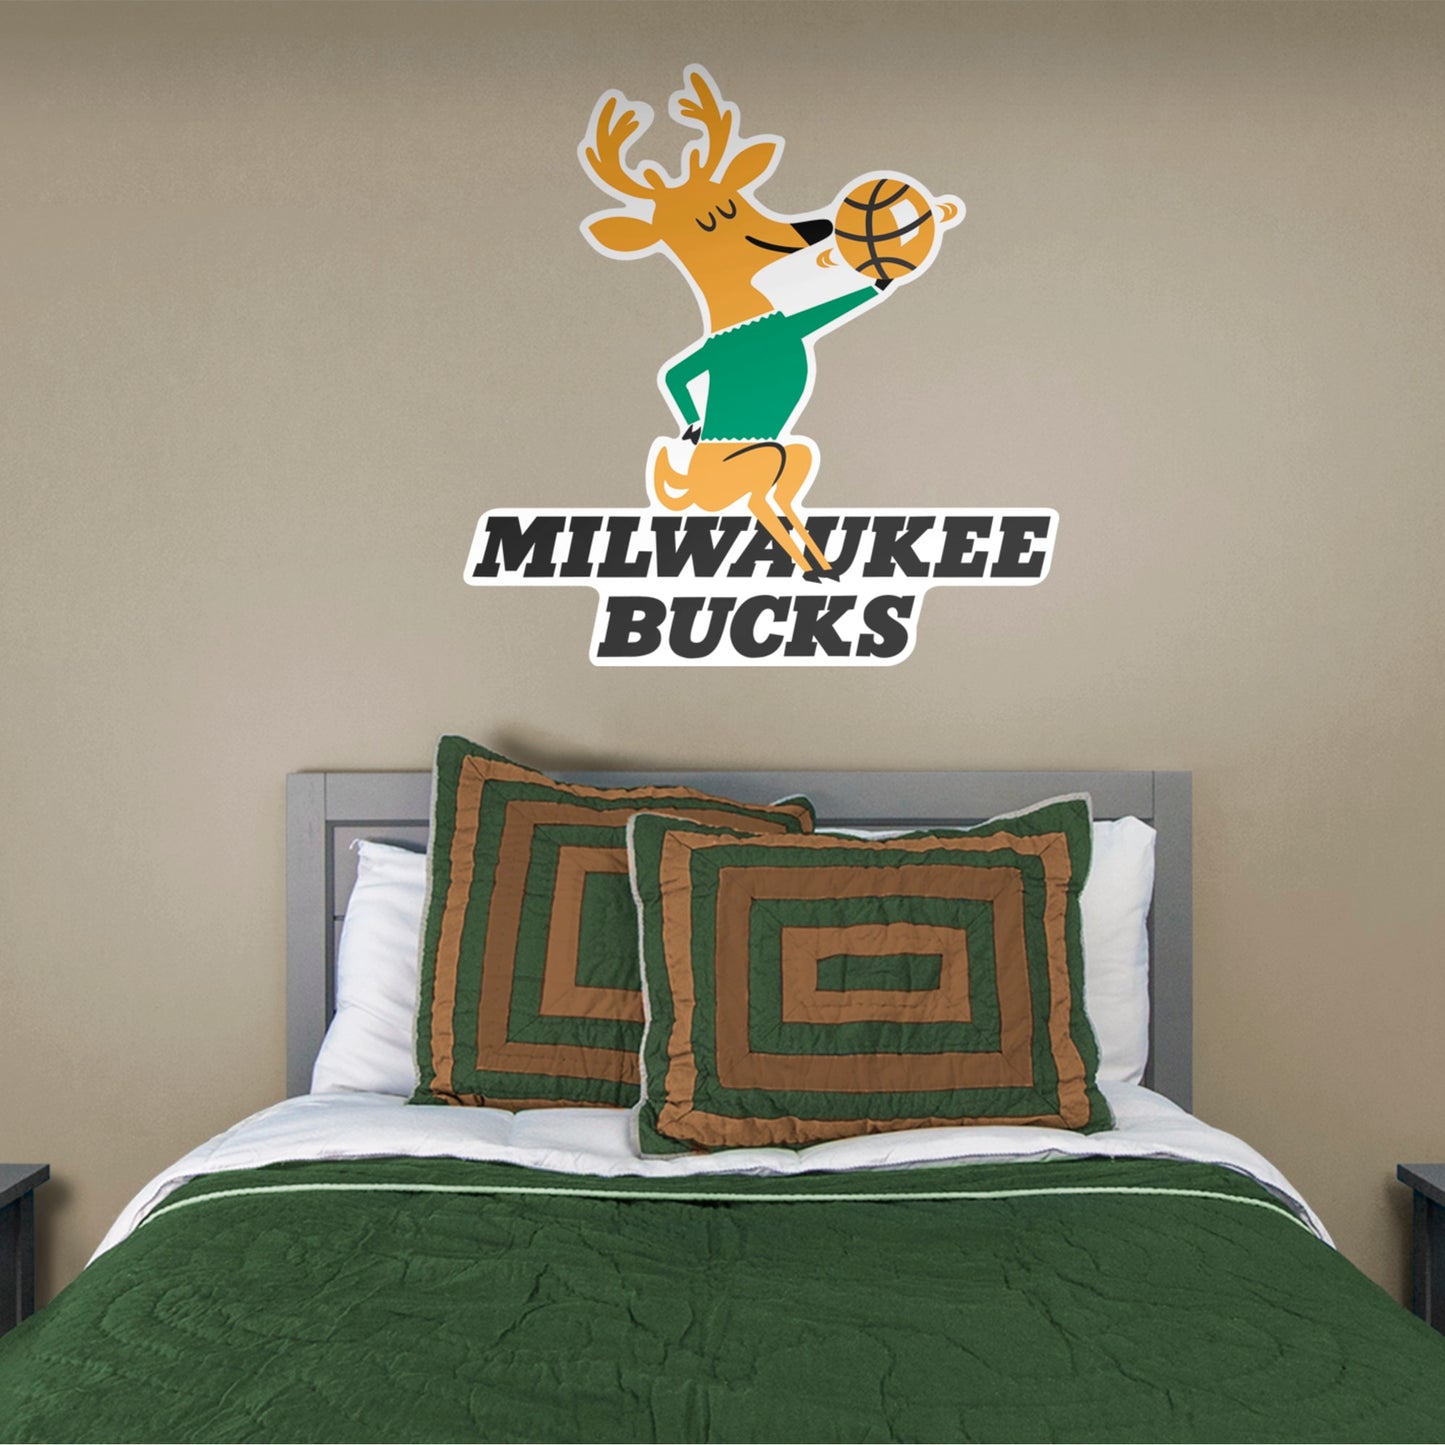 Milwaukee Bucks: Classic Logo - Officially Licensed NBA Removable Wall Decal